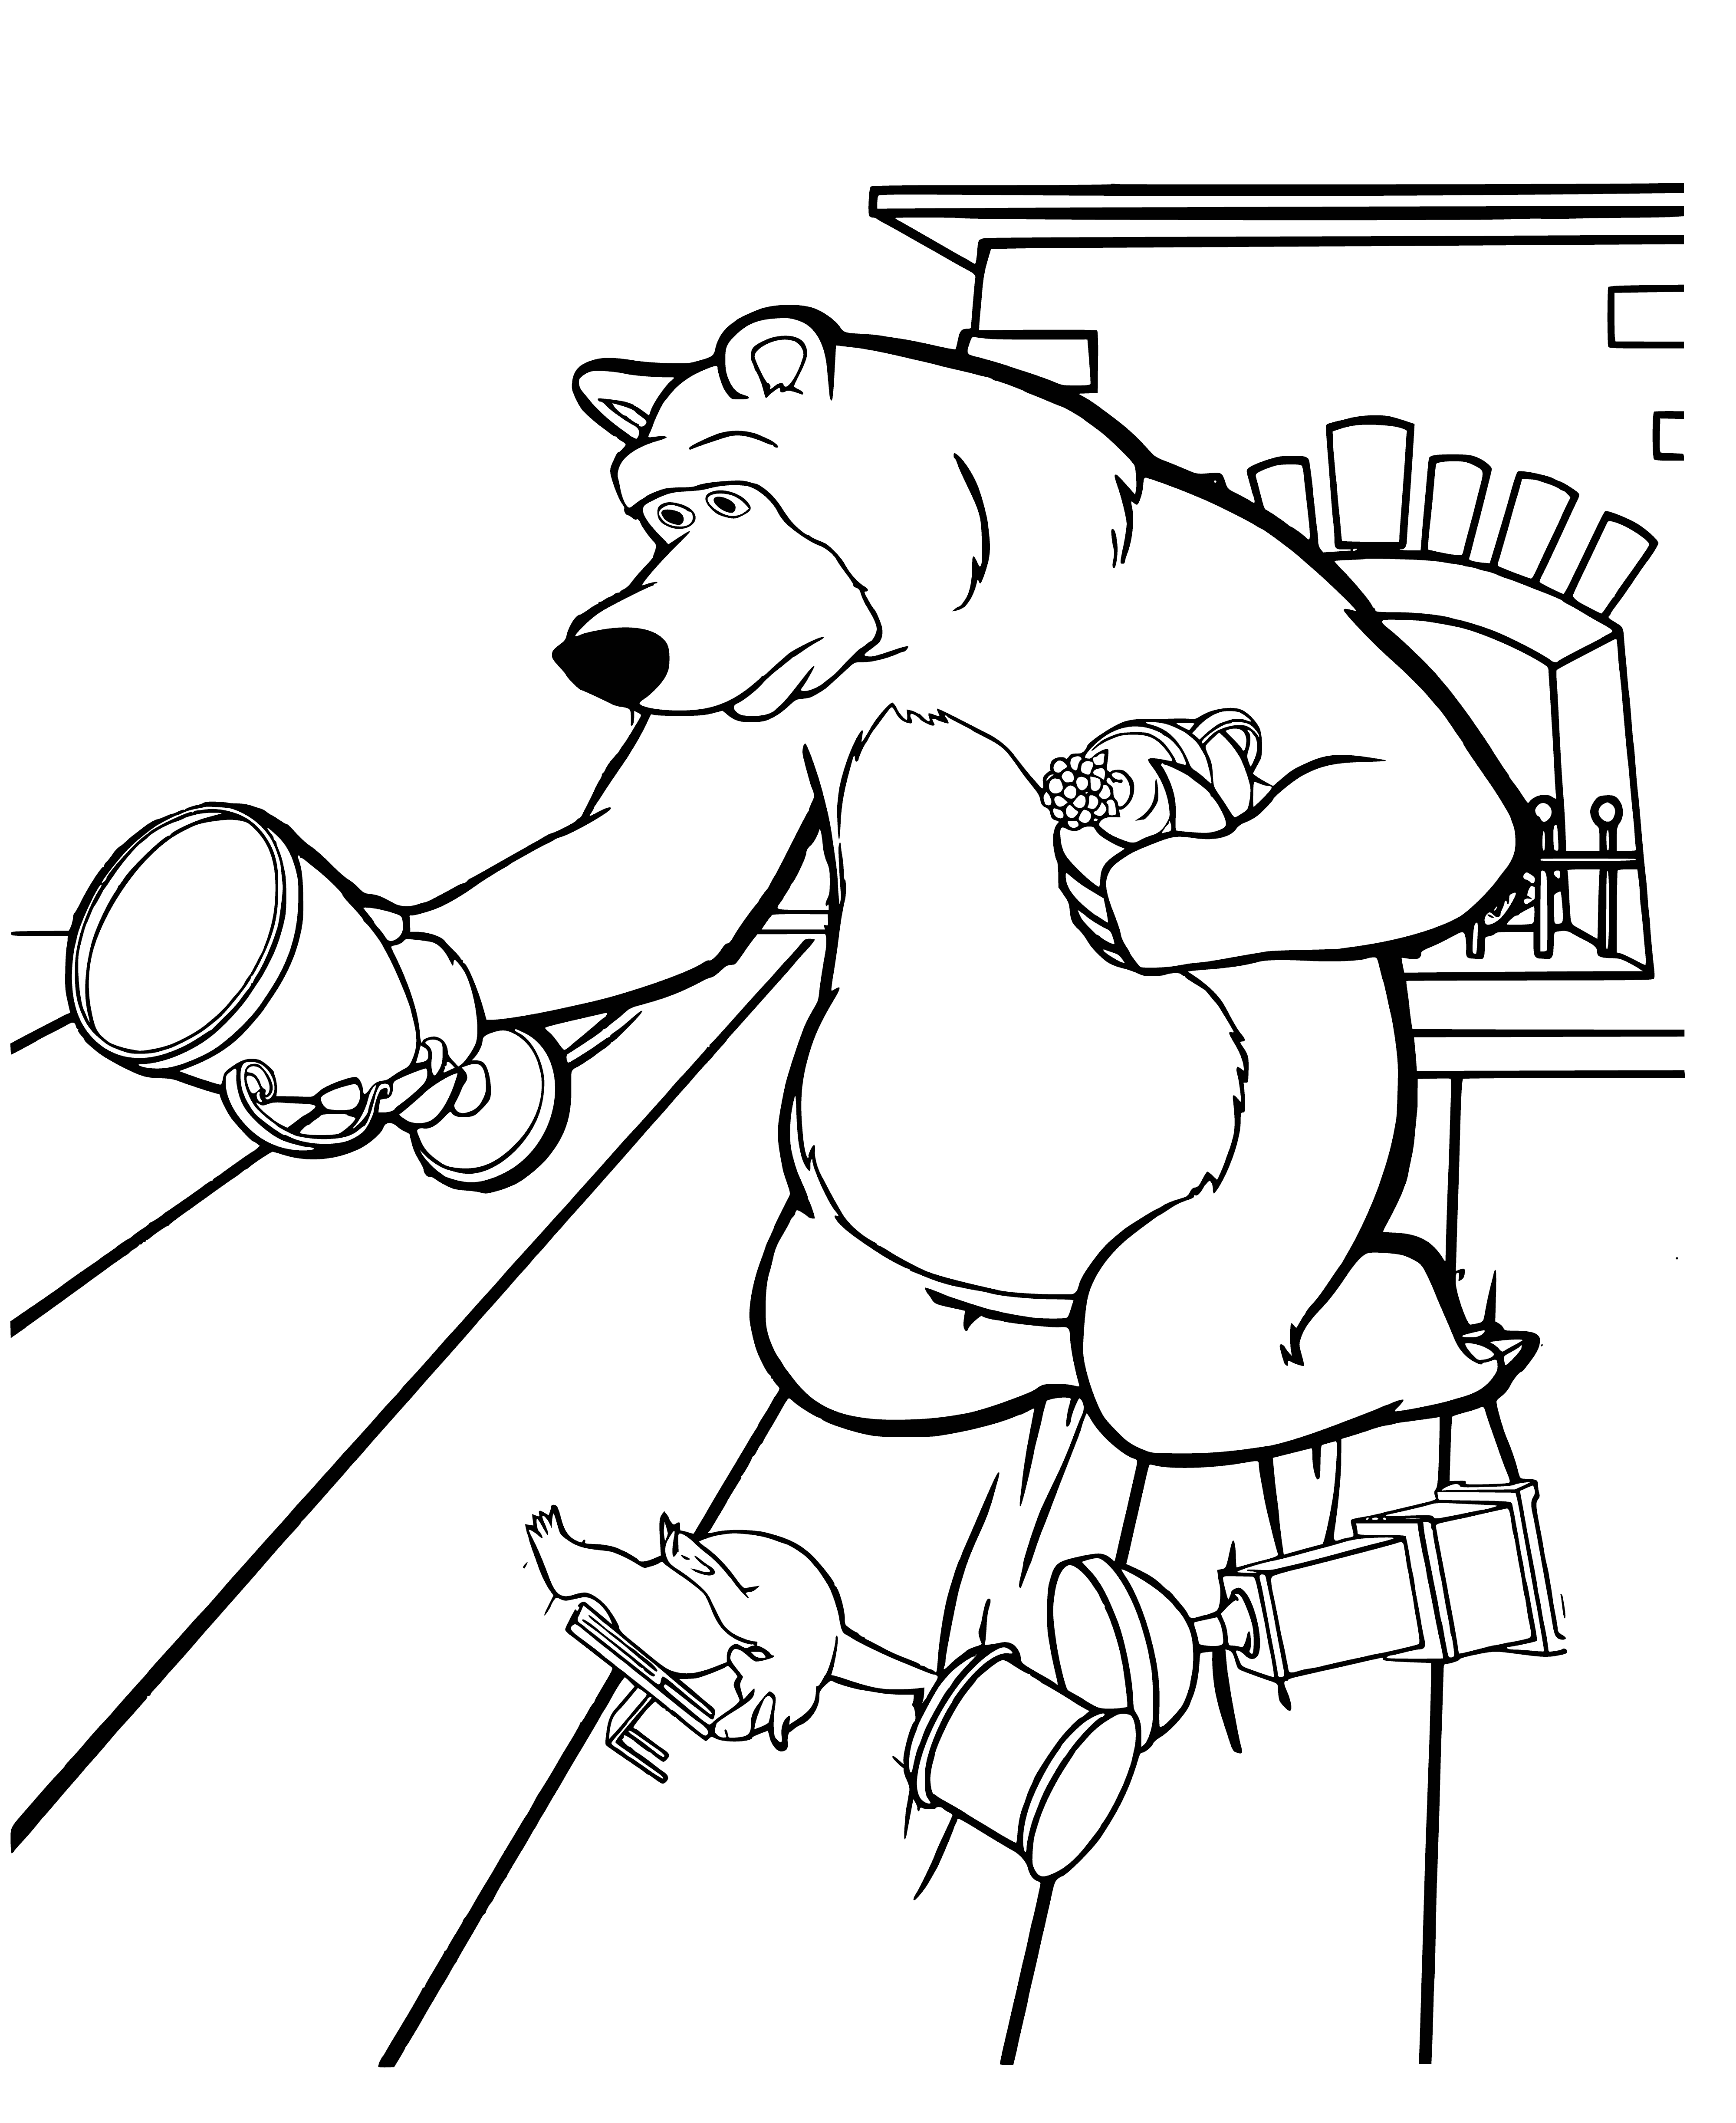 coloring page: Bear helps Masha clean up mess, holding broom and standing on a stool. Masha watches nearby.